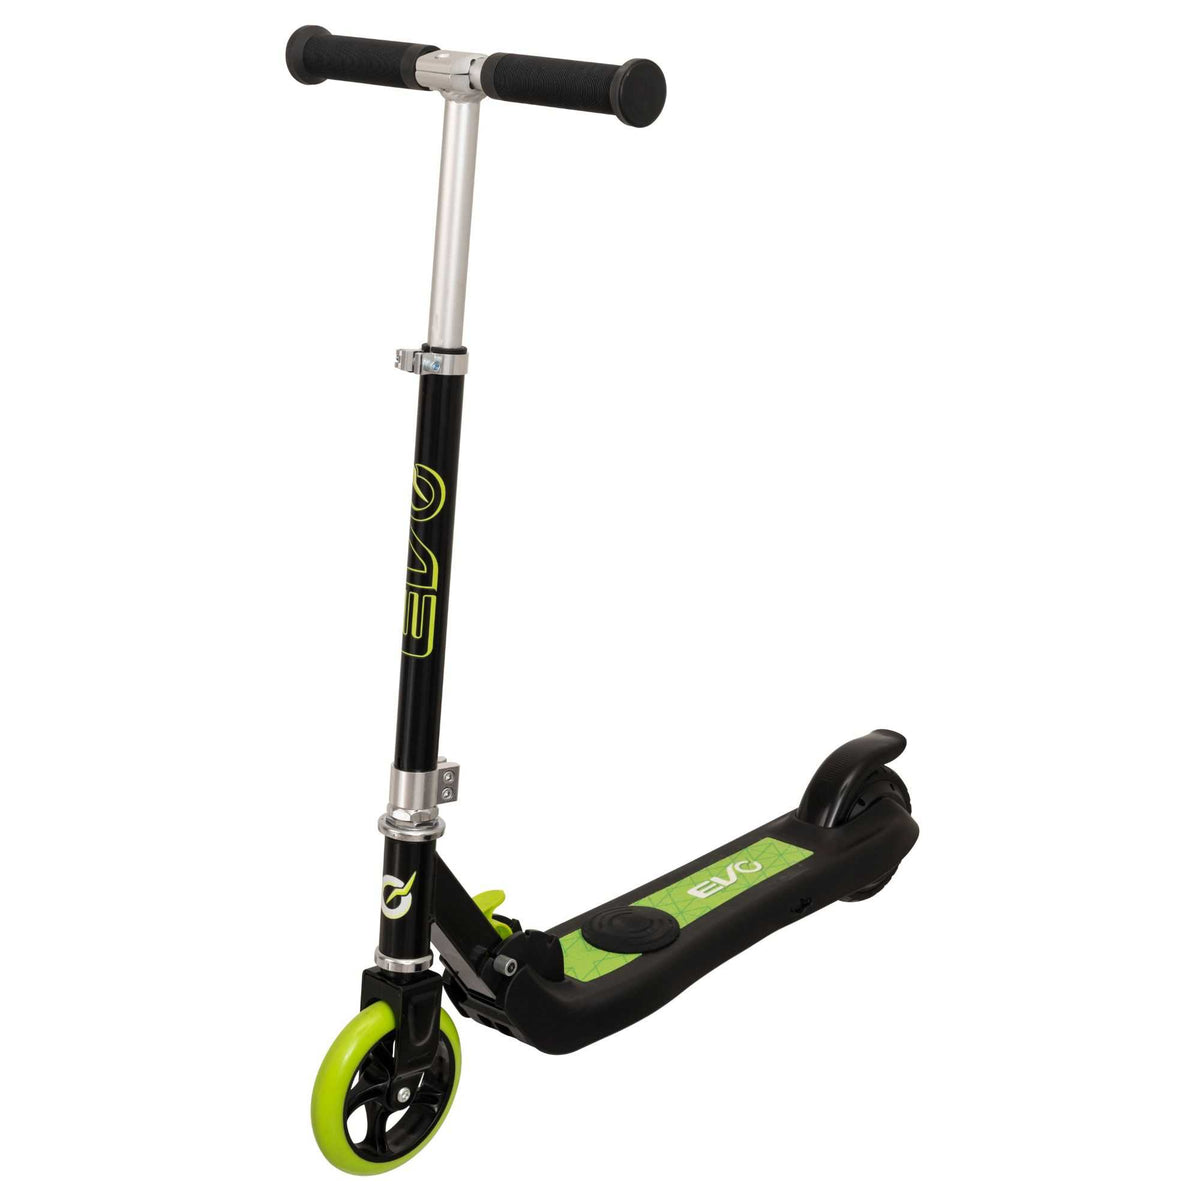 Electric Scooter, E-Scooter, Lithium Scooter, Kids Scooter, 2 Wheeled Scooter, Battery Powered Scooter, Childrens Electric Scooter